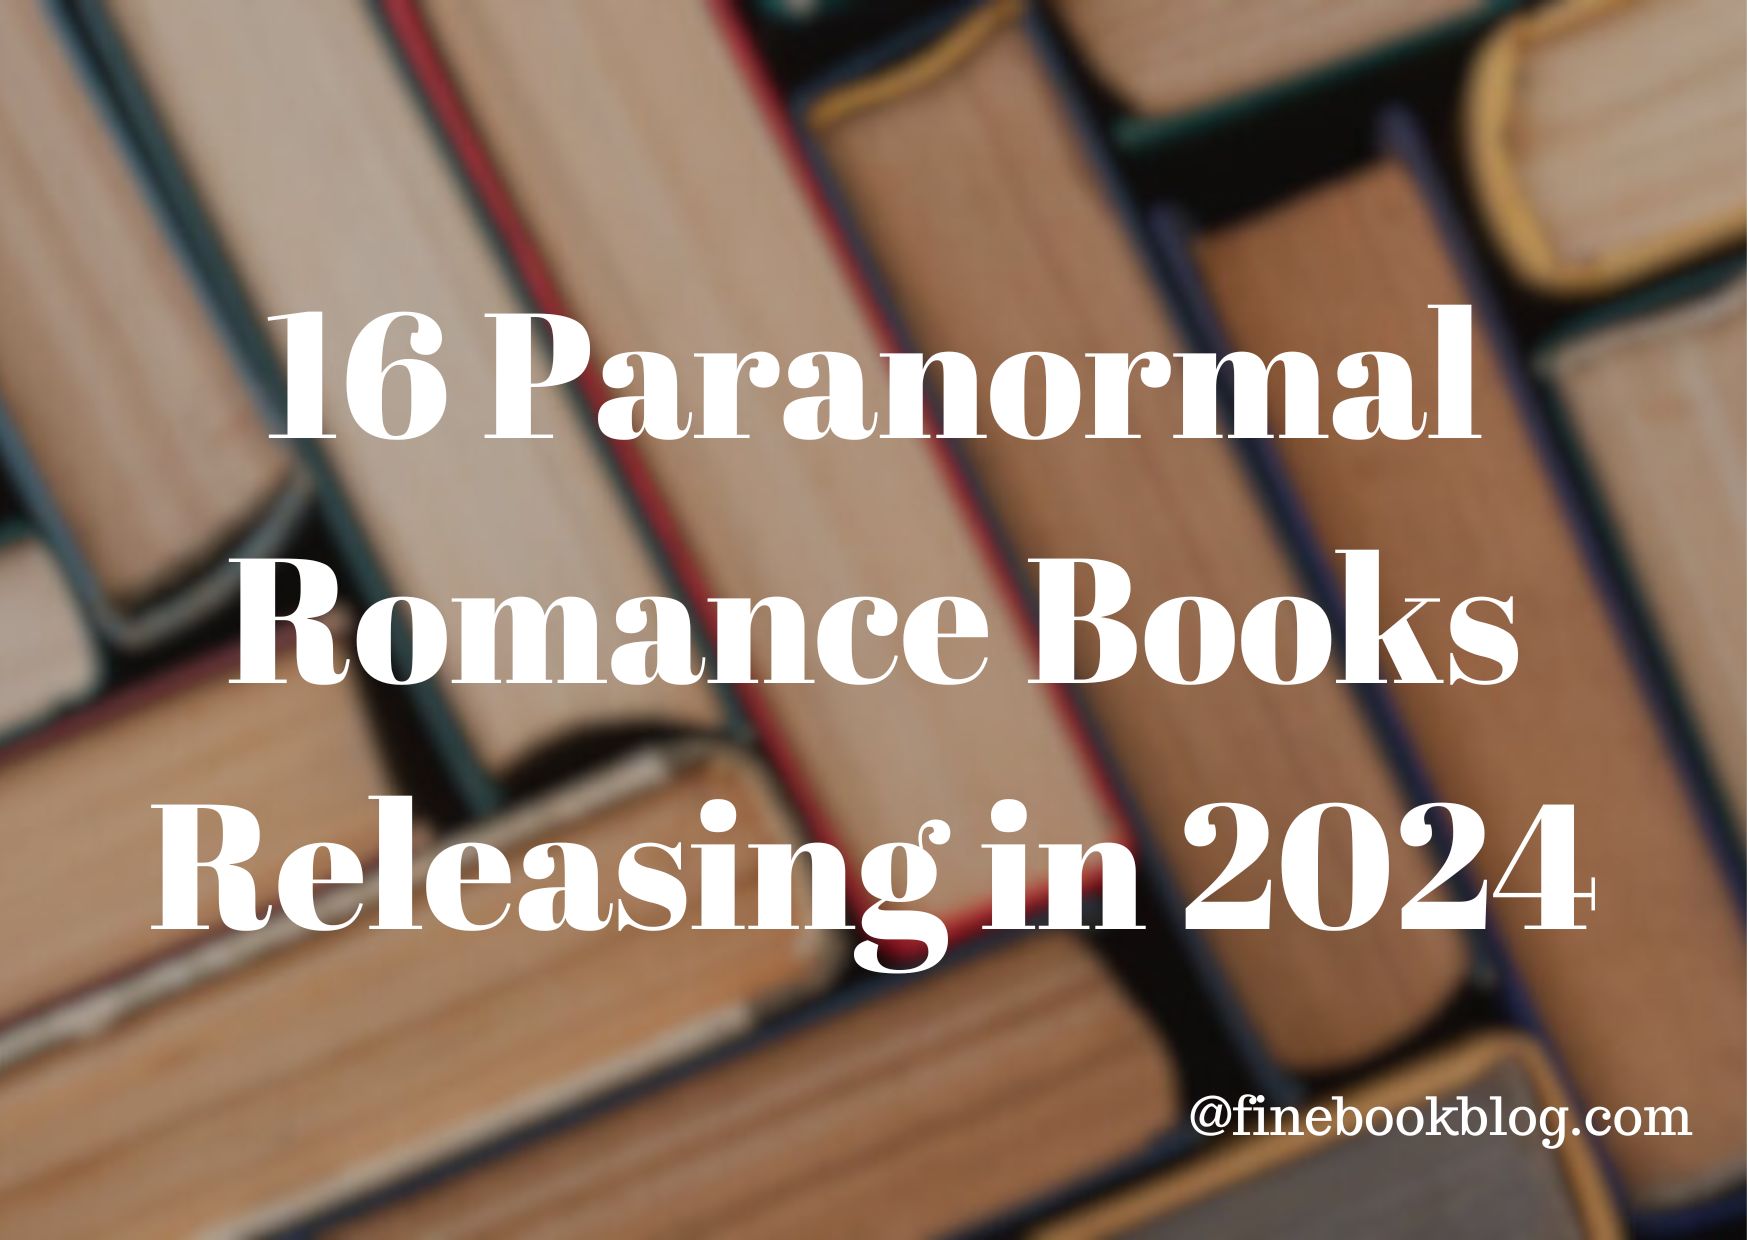 Exciting-paranormal-romance-books-releasing-2024